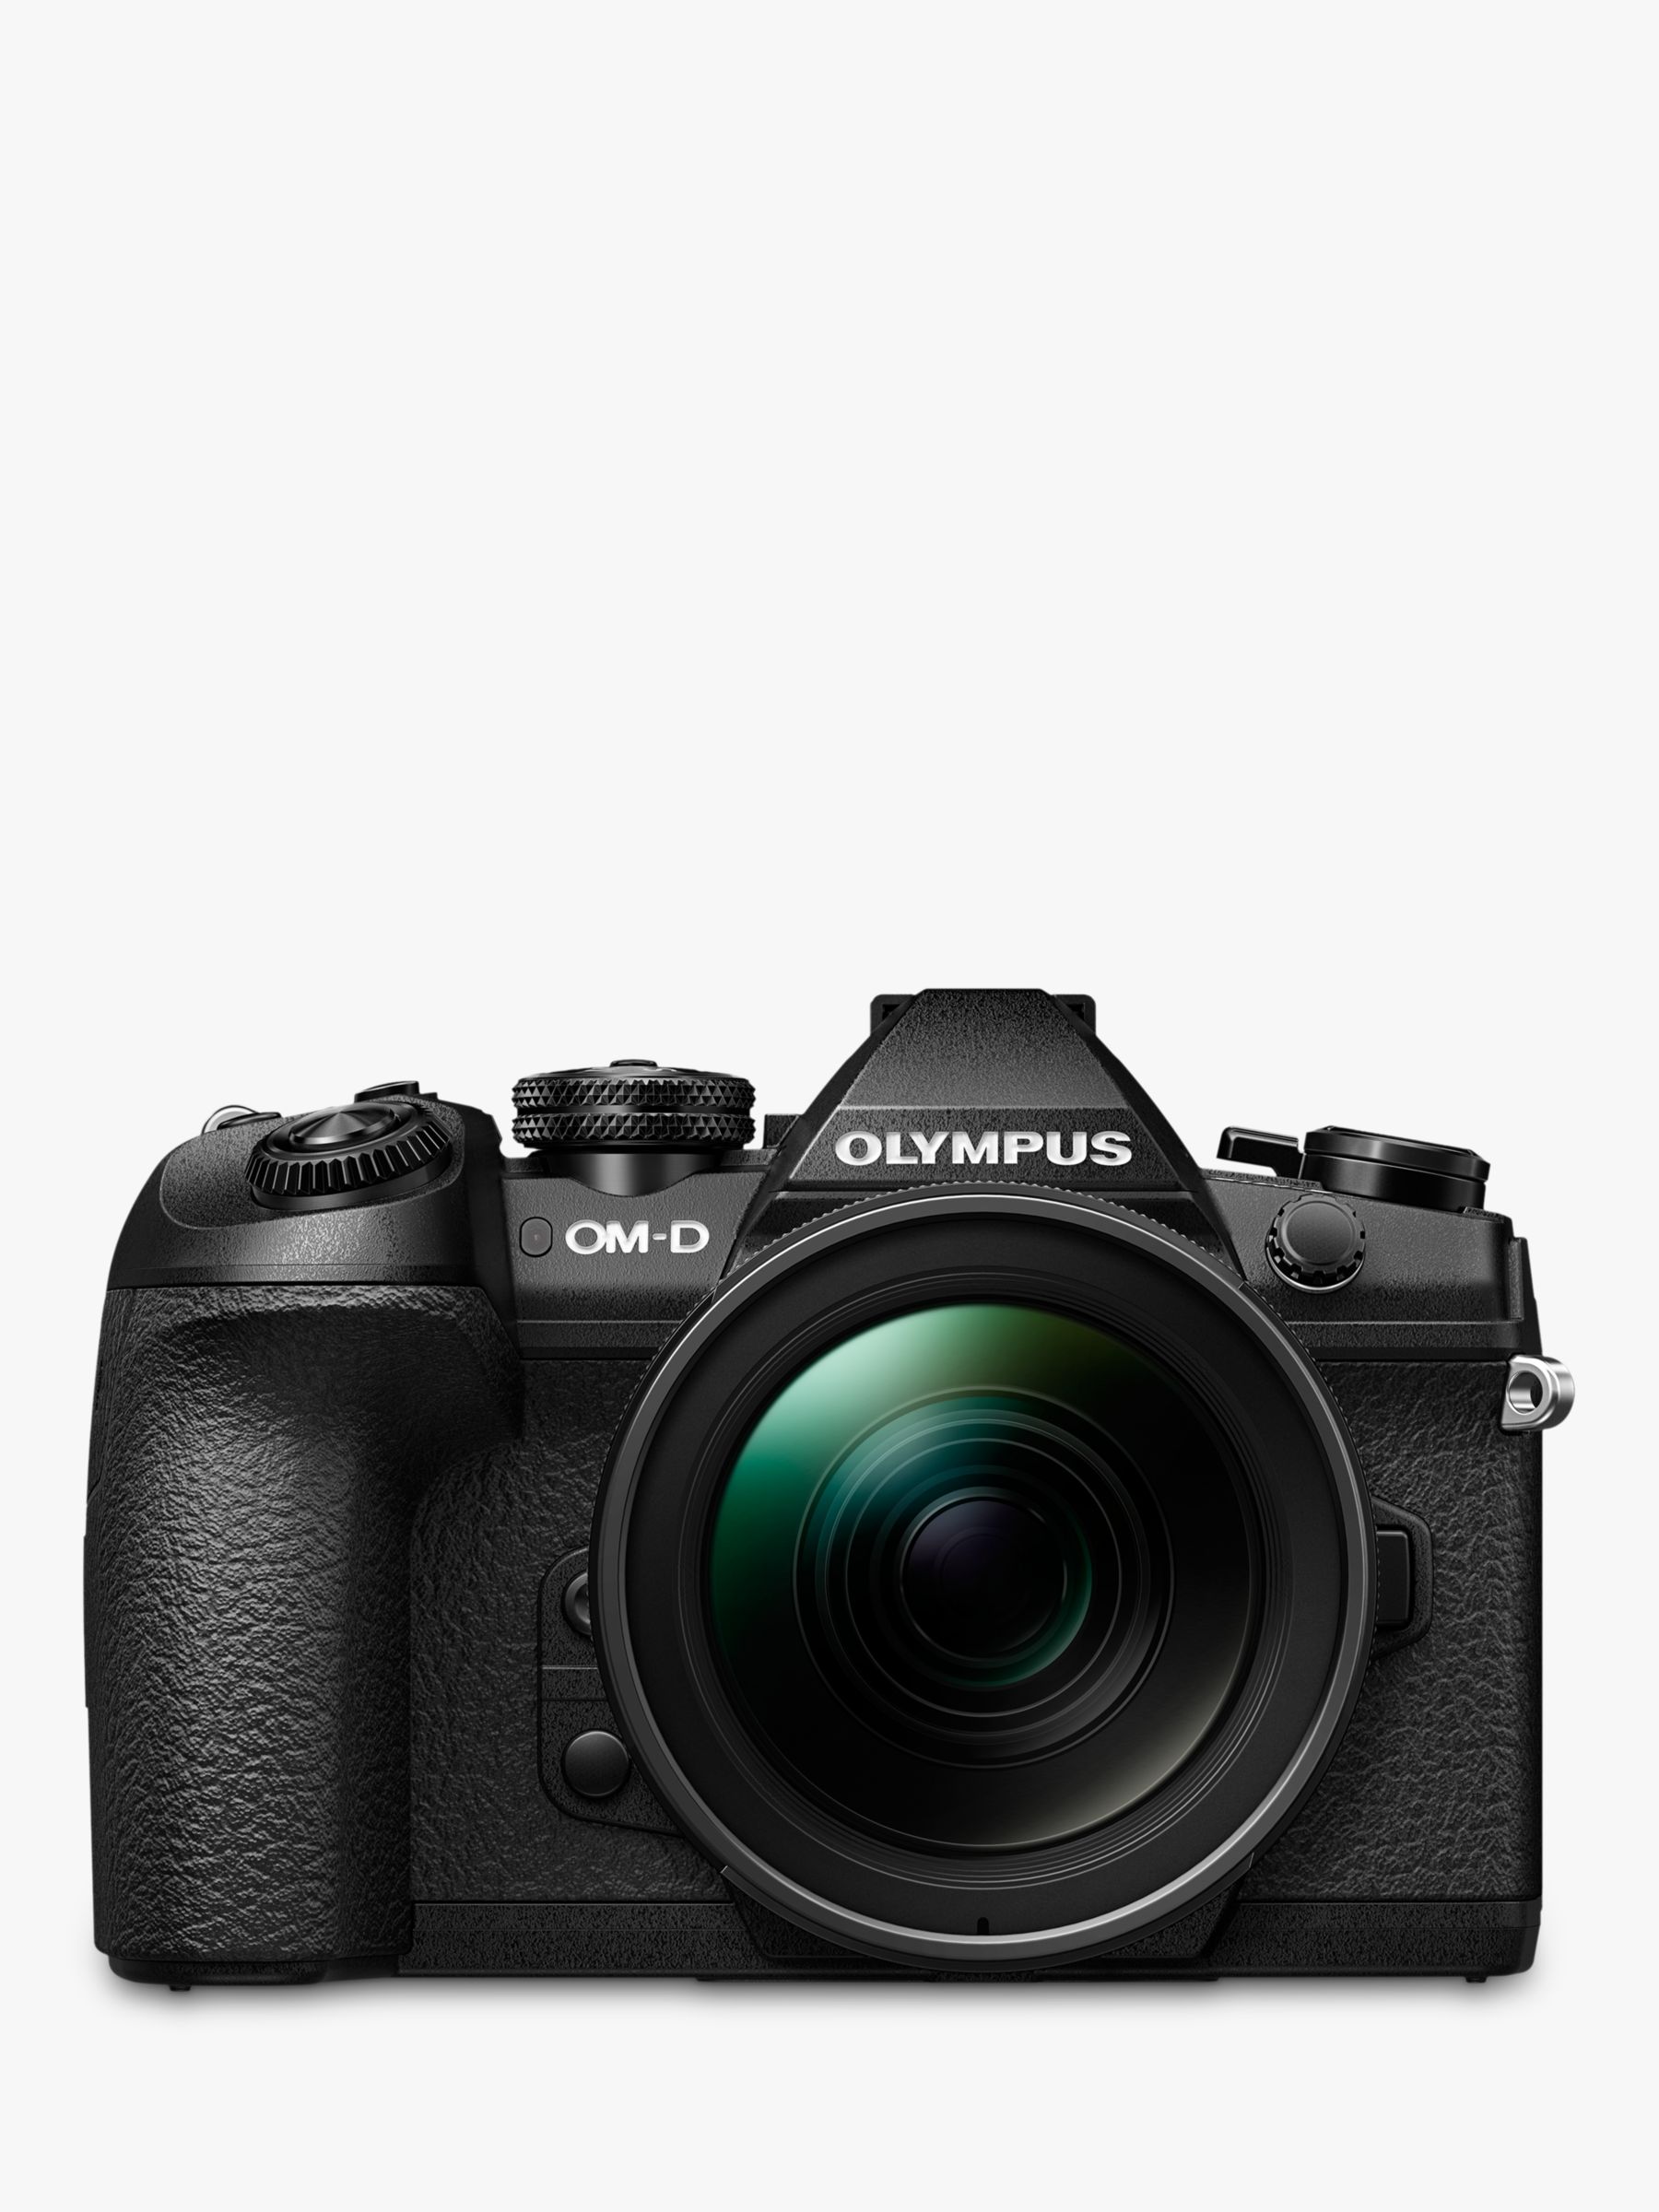 Olympus OM-D E-M1 Mark II Compact System Camera with 12-40mm PRO Lens, 4K UHD, 20.4MP, Wi-Fi, EVF, 3 Vari-angle LCD Touch Screen